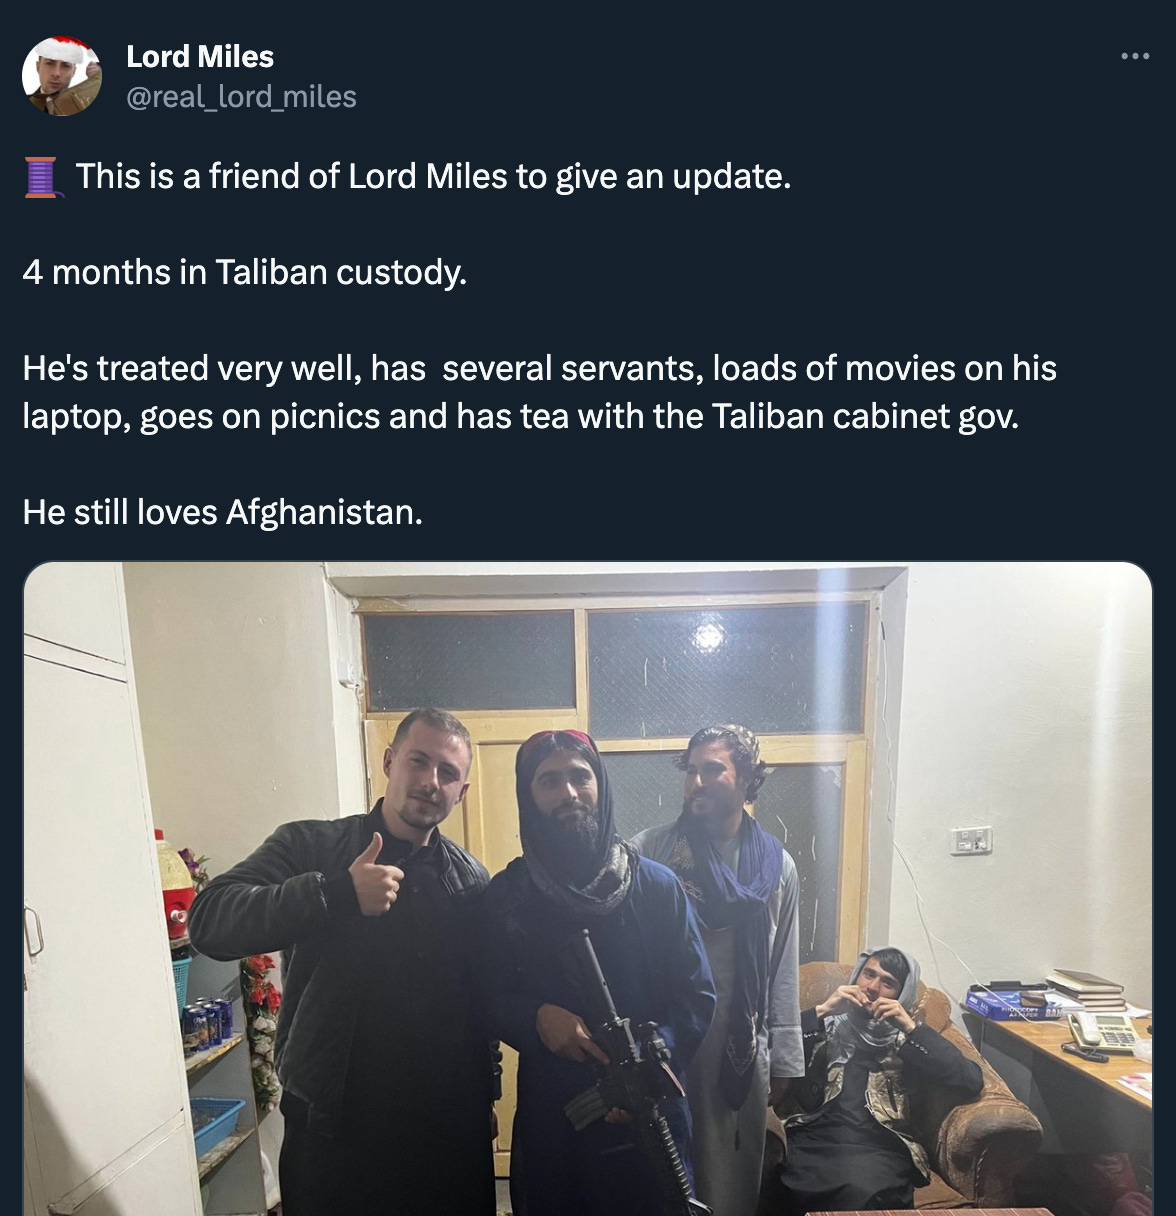 Same poster, a tweet from July 17th 2023: “🧵 This is a friend of Lord Miles to give an update. 4 months in Taliban custody. He's treated very well, has several servants, loads of movies on his laptop, goes on picnics and has tea with the Taliban cabinet gov. He still loves Afghanistan,” with a picture of four men, three of them in Afghan dress and one holding an assault rifle, and the fourth in Western clothes giving a thumbs-up.